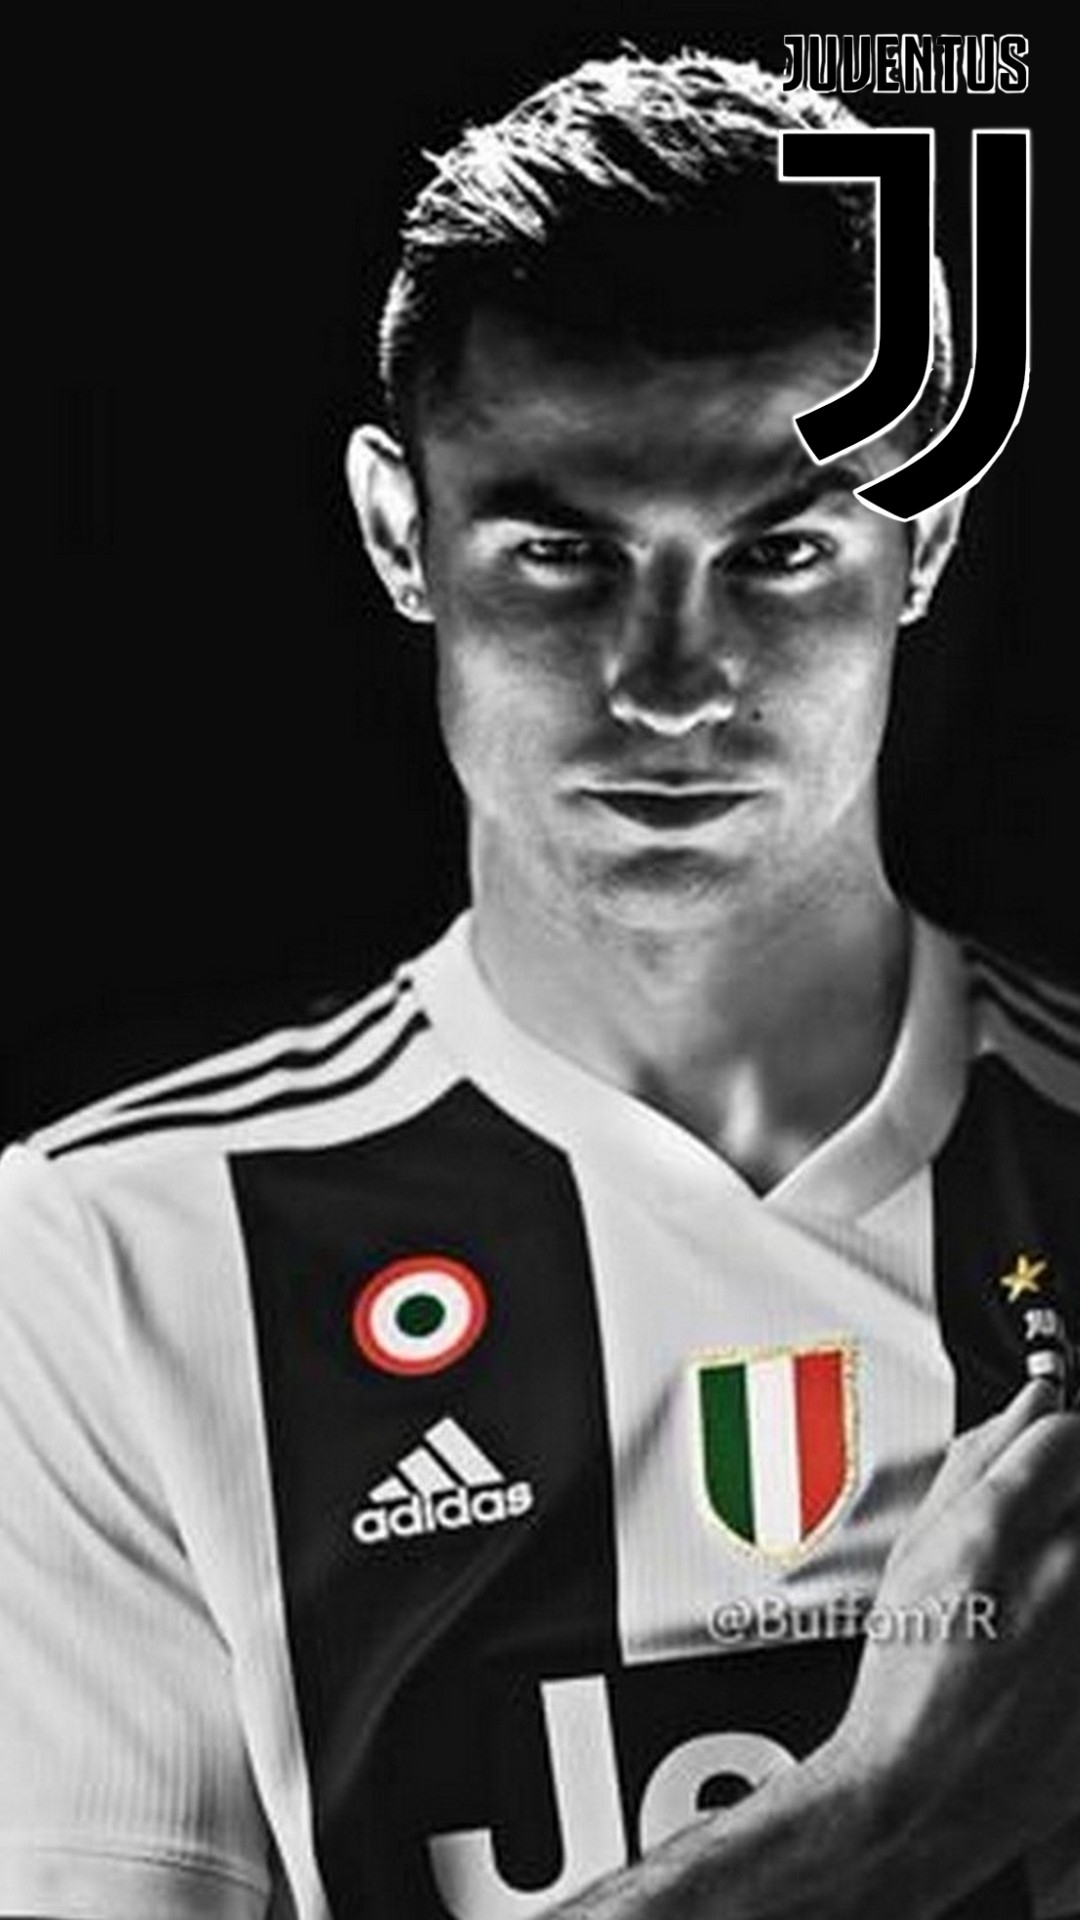 Cristiano Ronaldo Juventus iPhone X Wallpaper with resolution 1080x1920 pixel. You can make this wallpaper for your Mac or Windows Desktop Background, iPhone, Android or Tablet and another Smartphone device